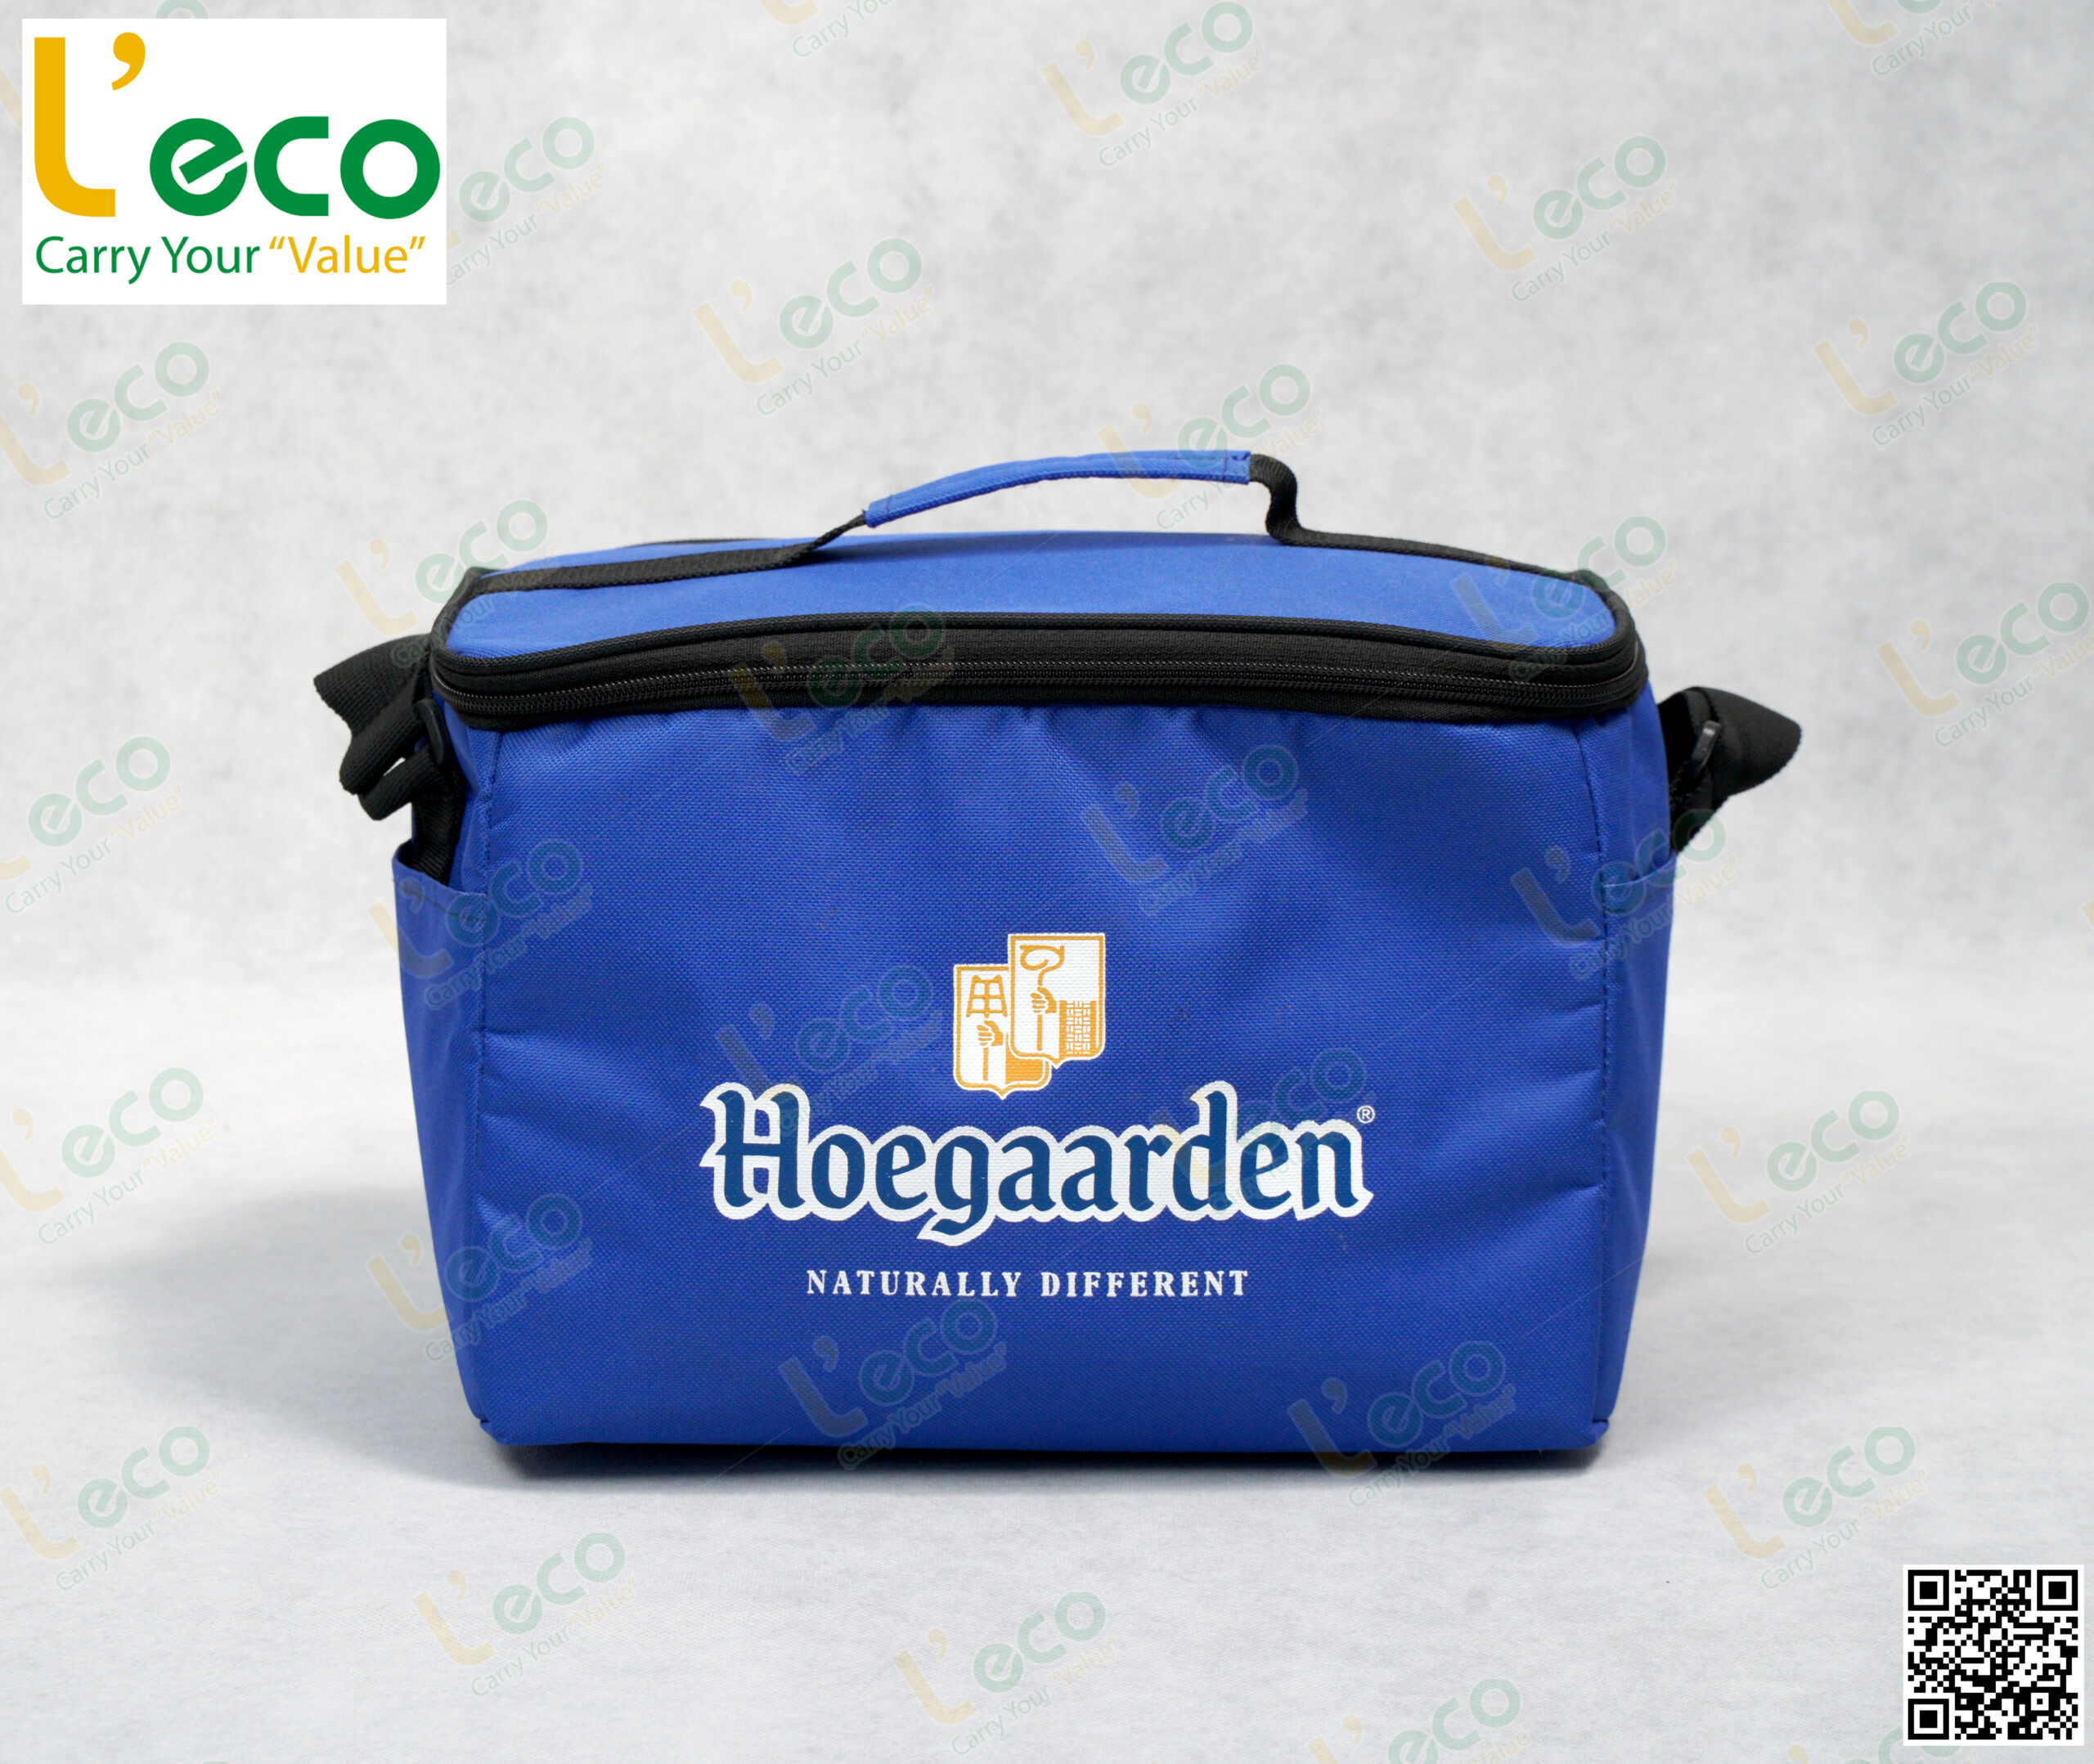 Hoegaarden Thermal Bags Manufactured According to Demand at An Van Thanh Fabric Bag Garment Factory